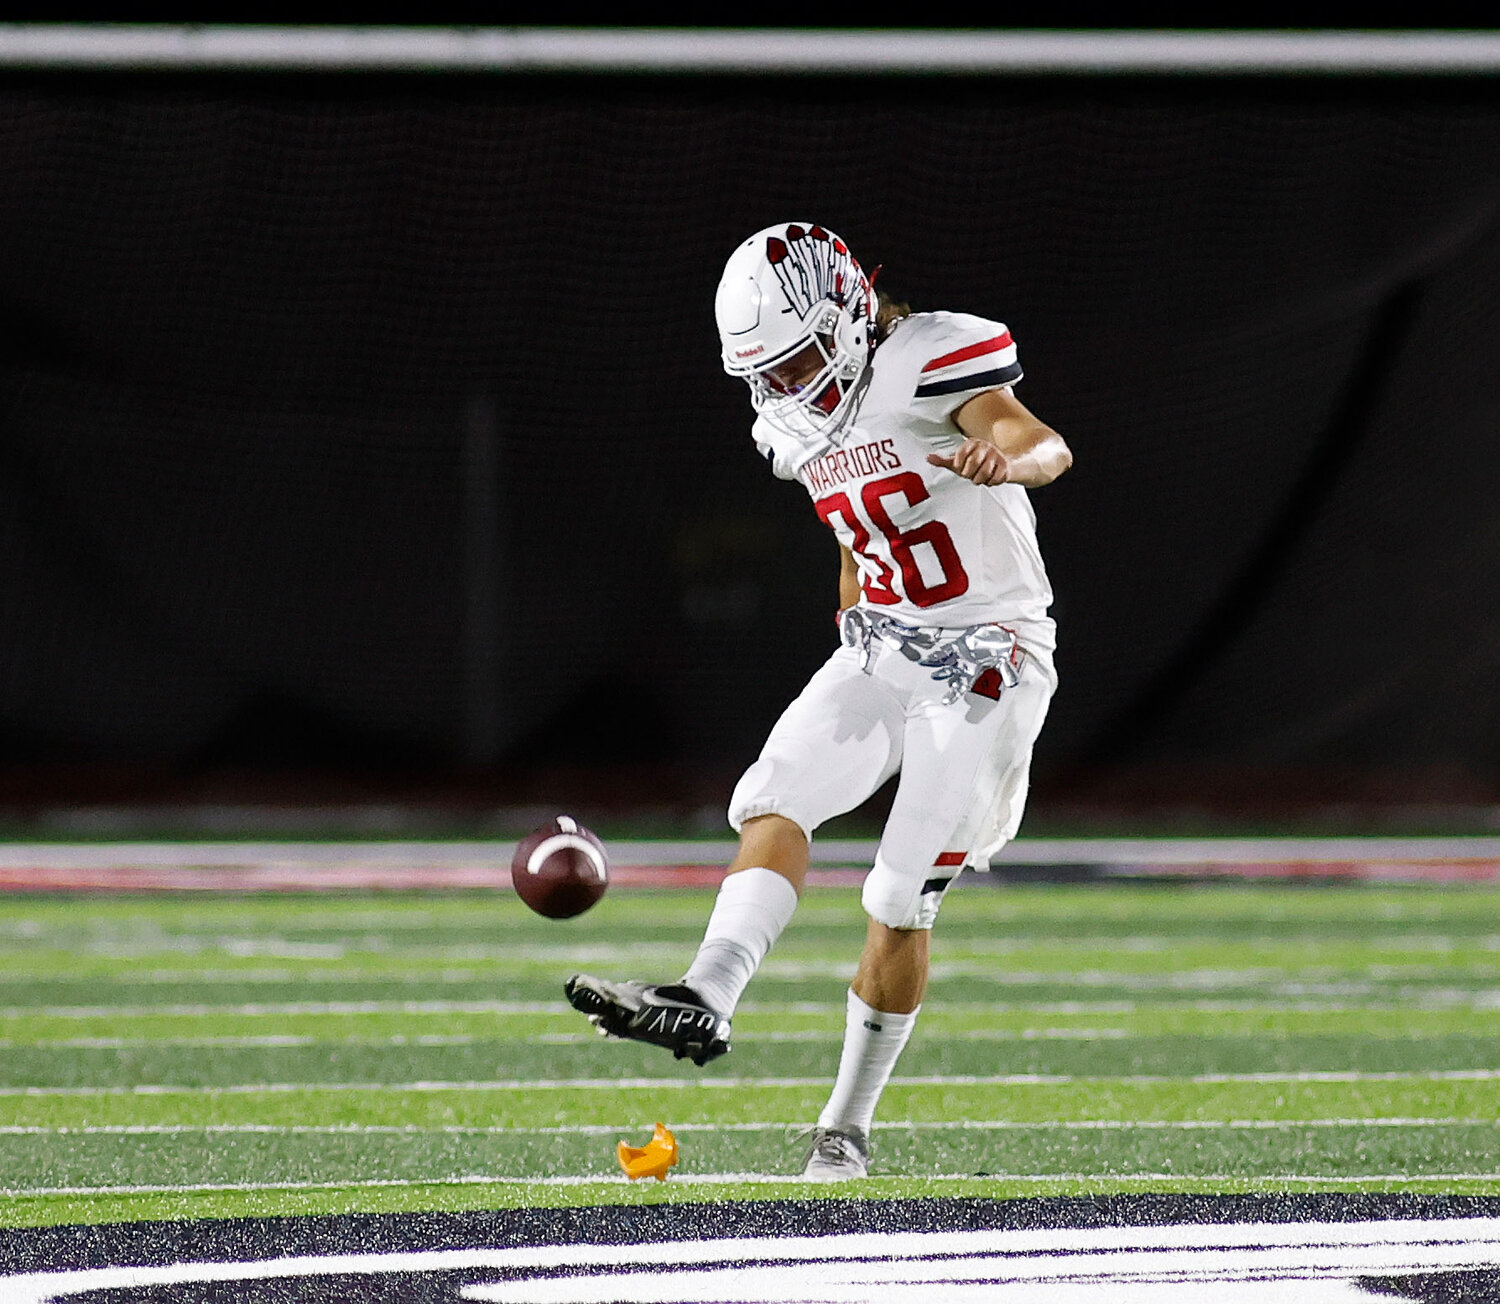 Warrenton's Tyler Faerber (36) kicks off during a game against Fort Zumwalt South, Friday, Aug. 25, 2023, at Fort Zumwalt South High School in St. Peters, Mo.